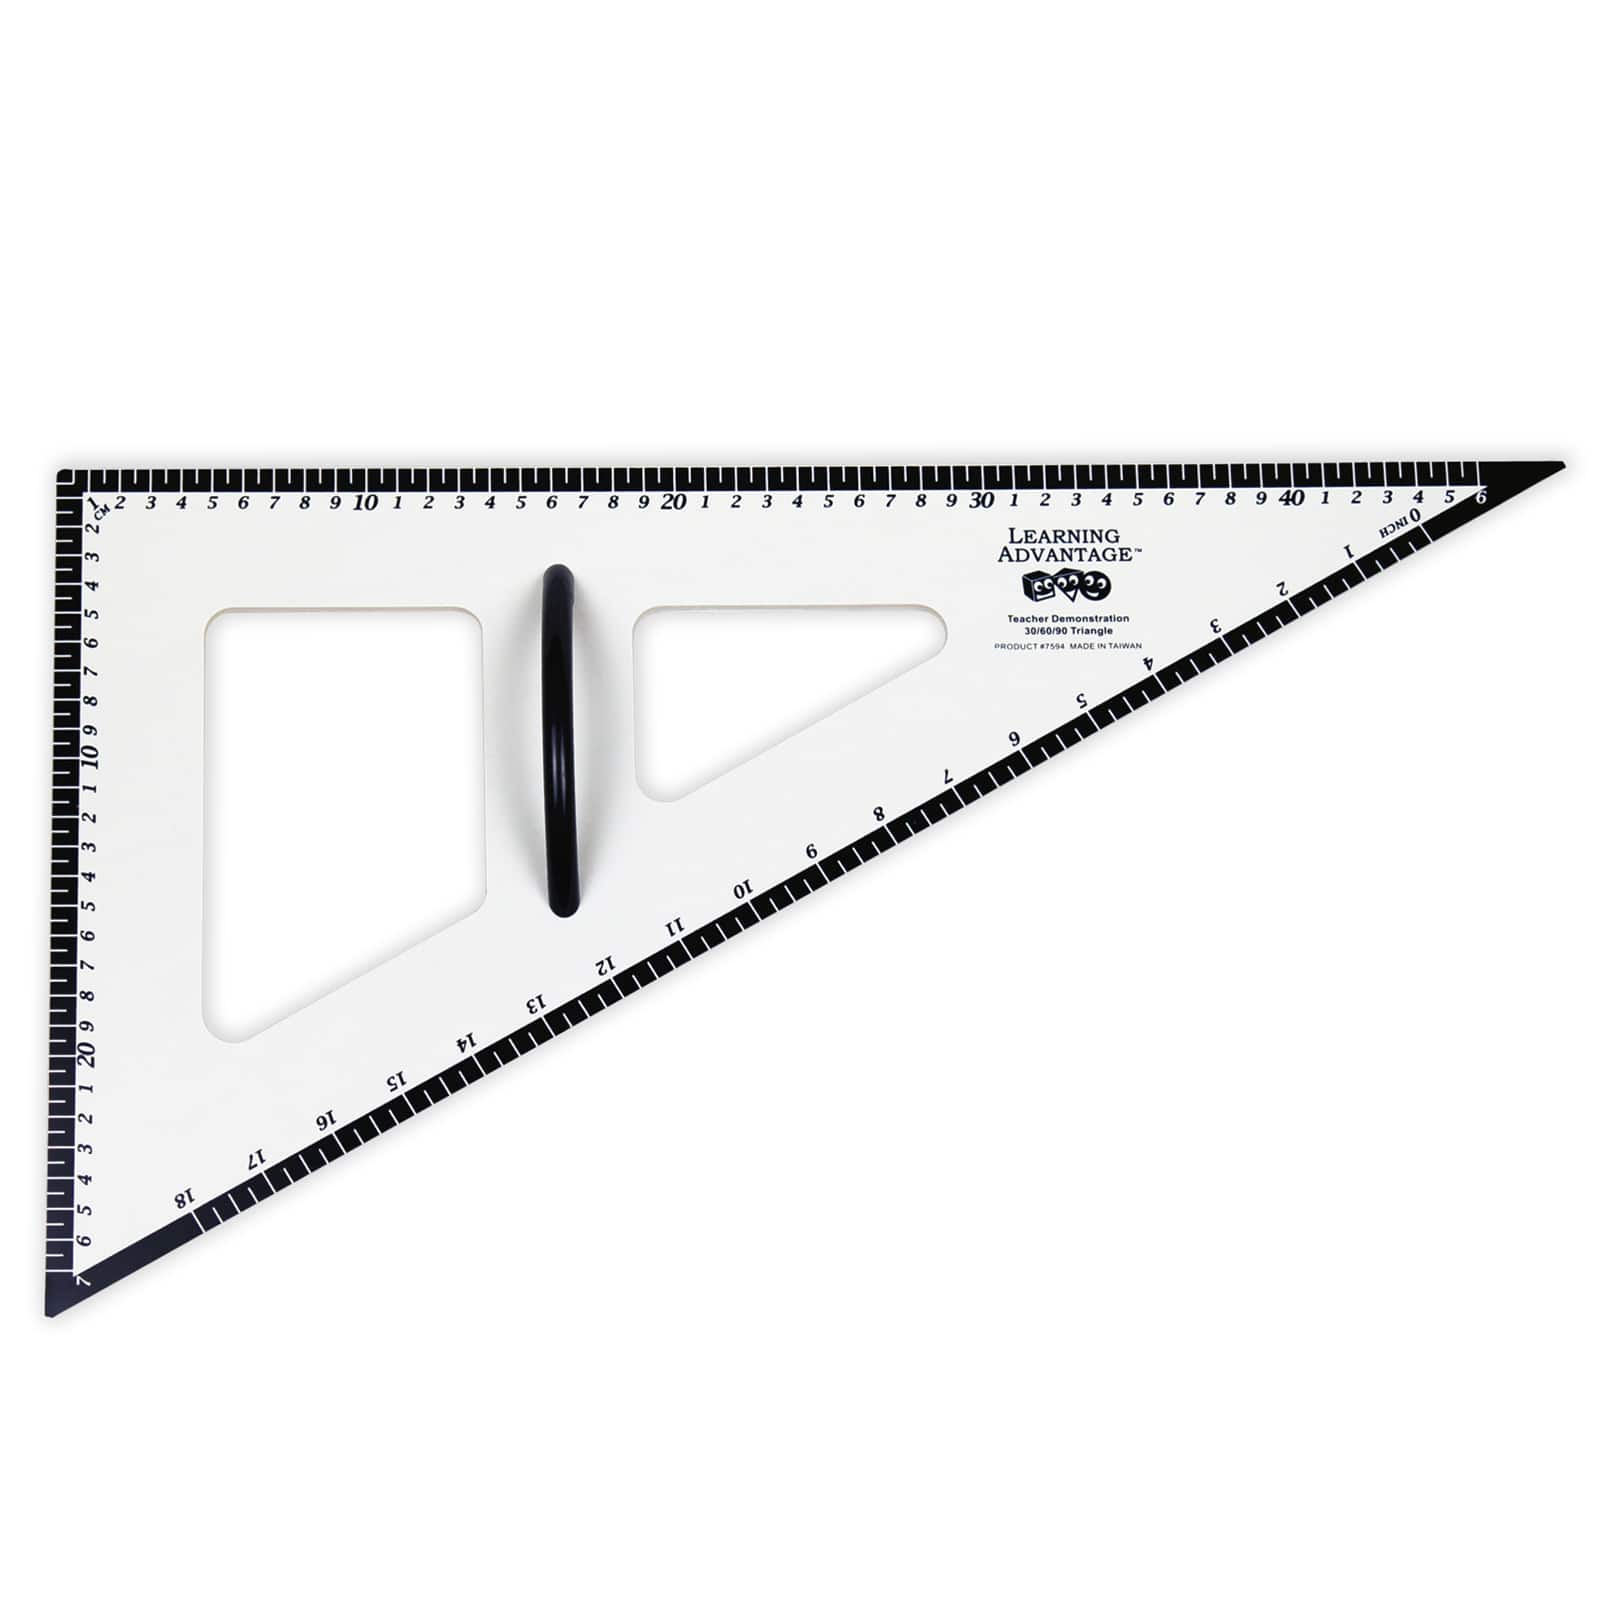 Learning Advantage Dry Erase Magnetic Triangle 30 60 90